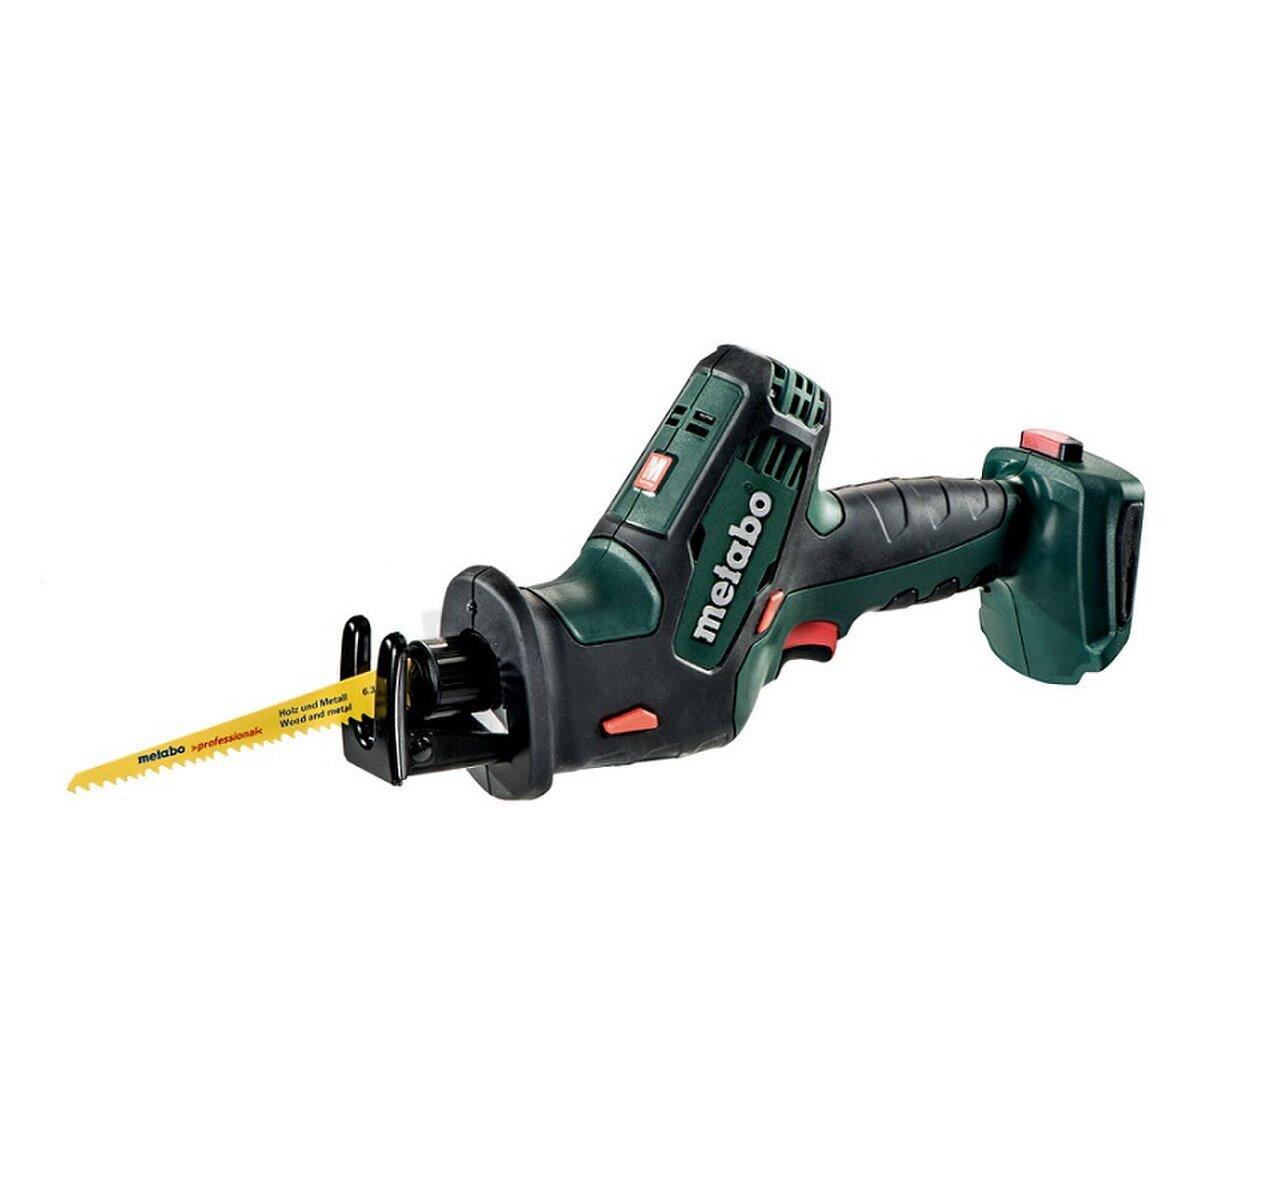 Metabo-602266840 SSE 18 LTX Compact (body in Metaloc)